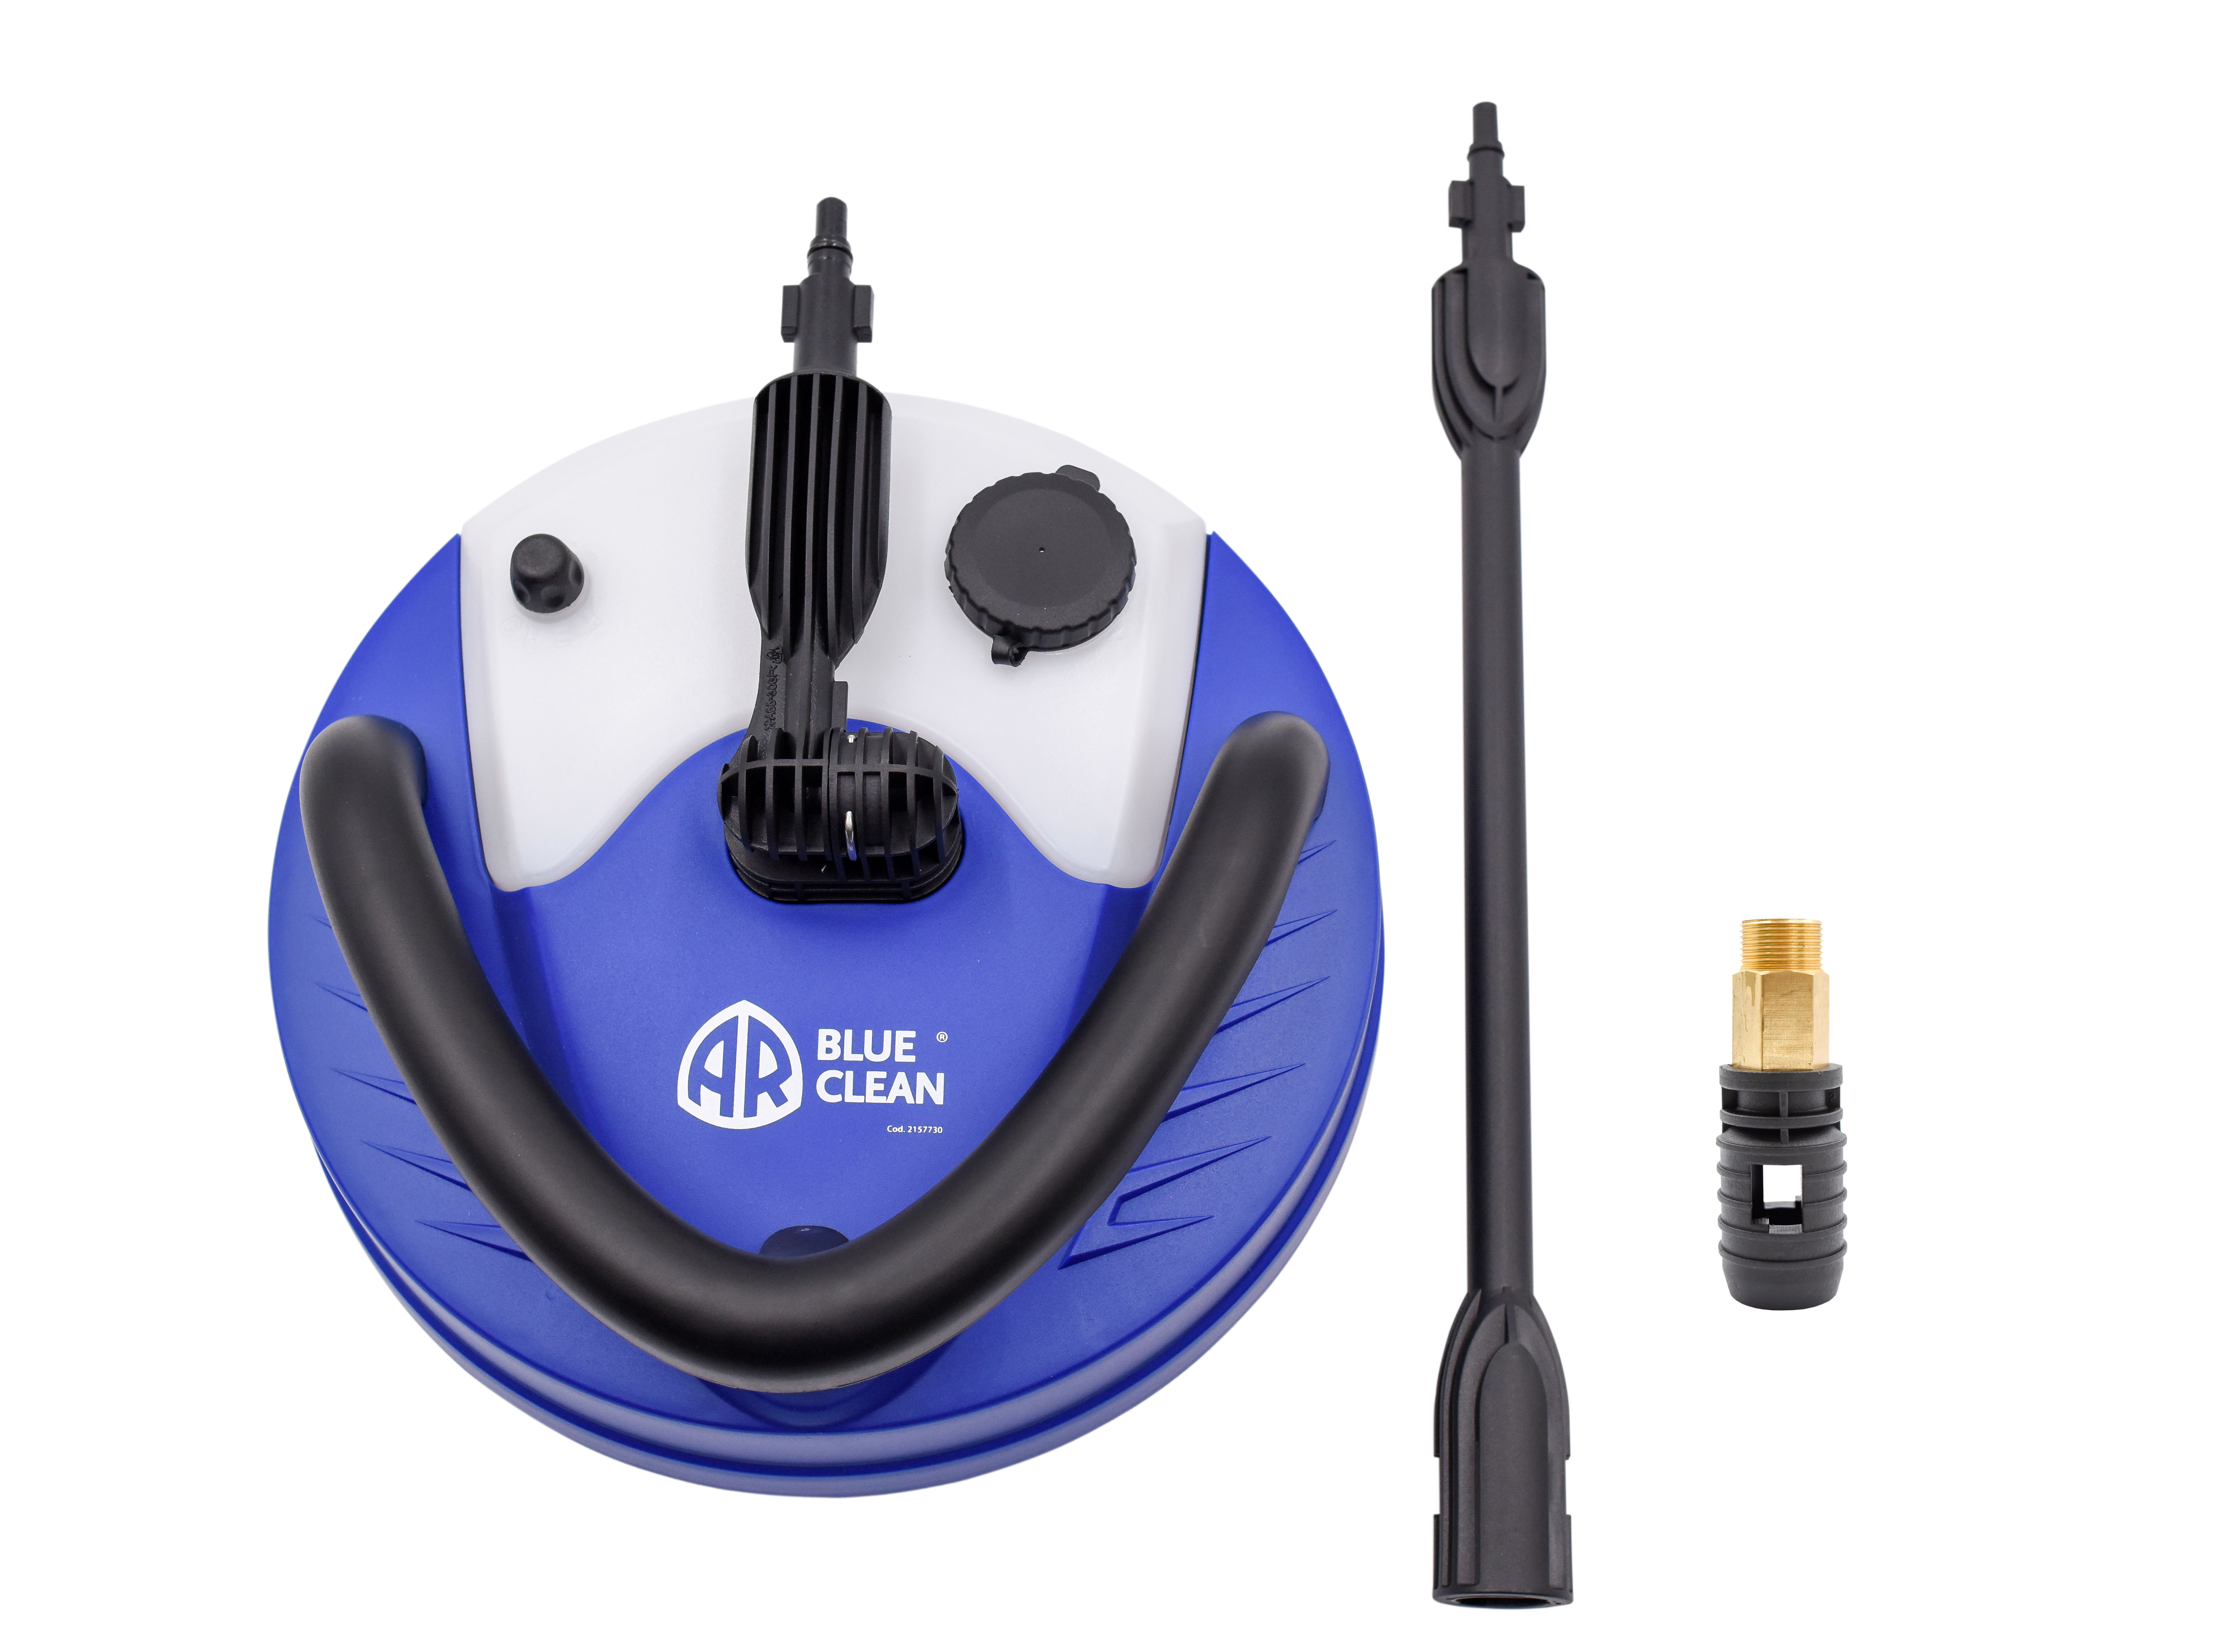 Is this the appropriate surface cleaner for the AR 630-TSS?